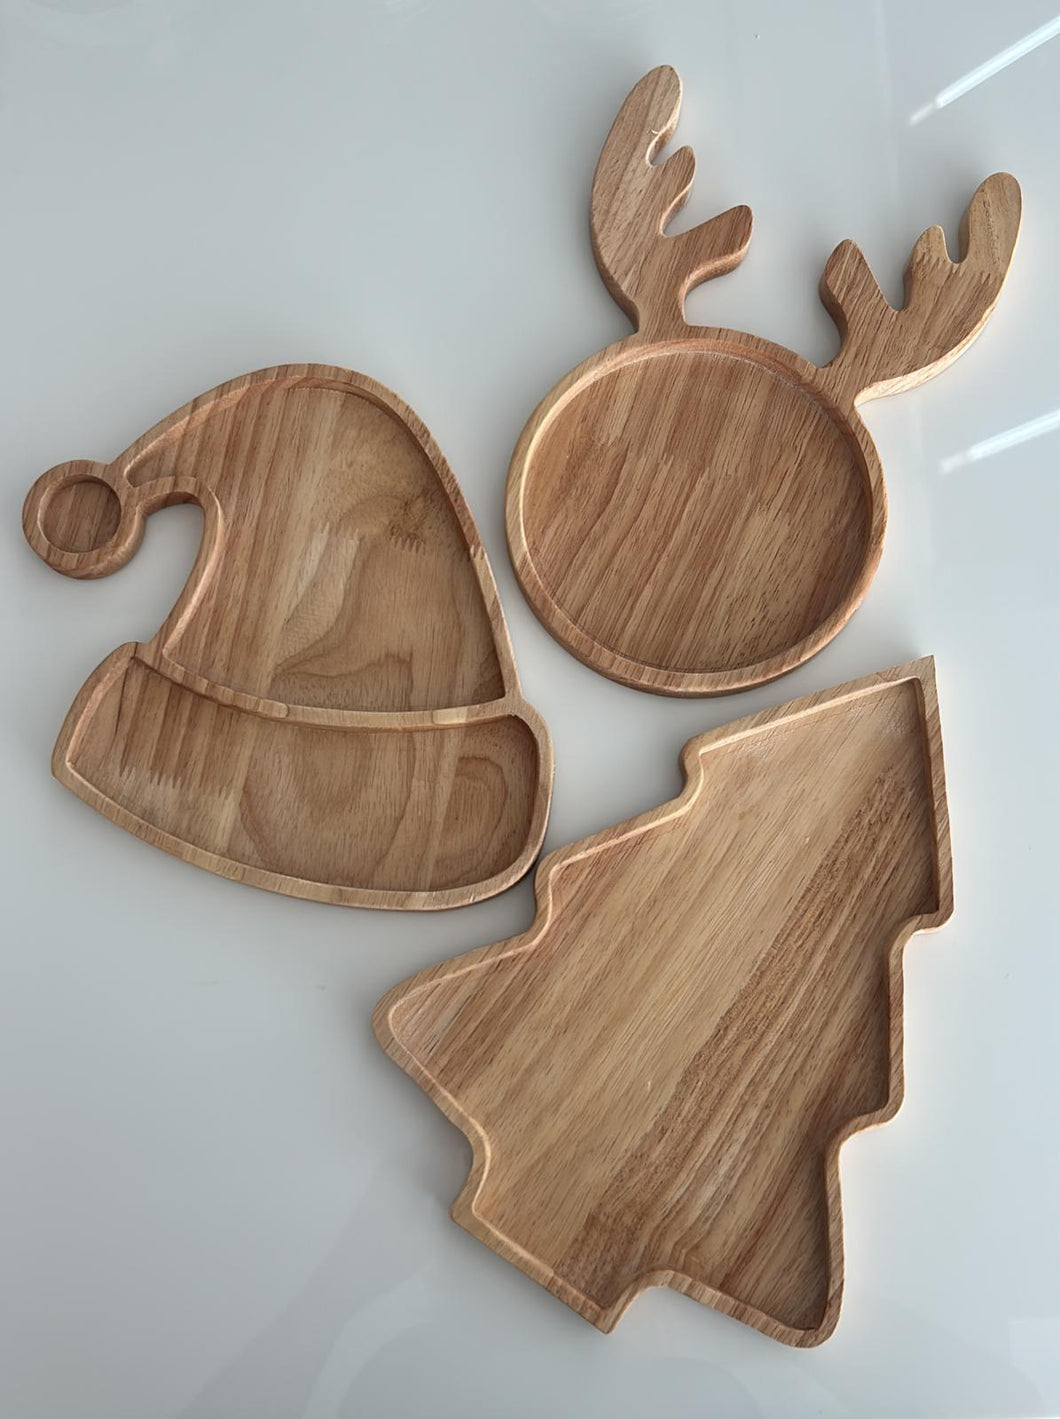 Wooden Christmas plates